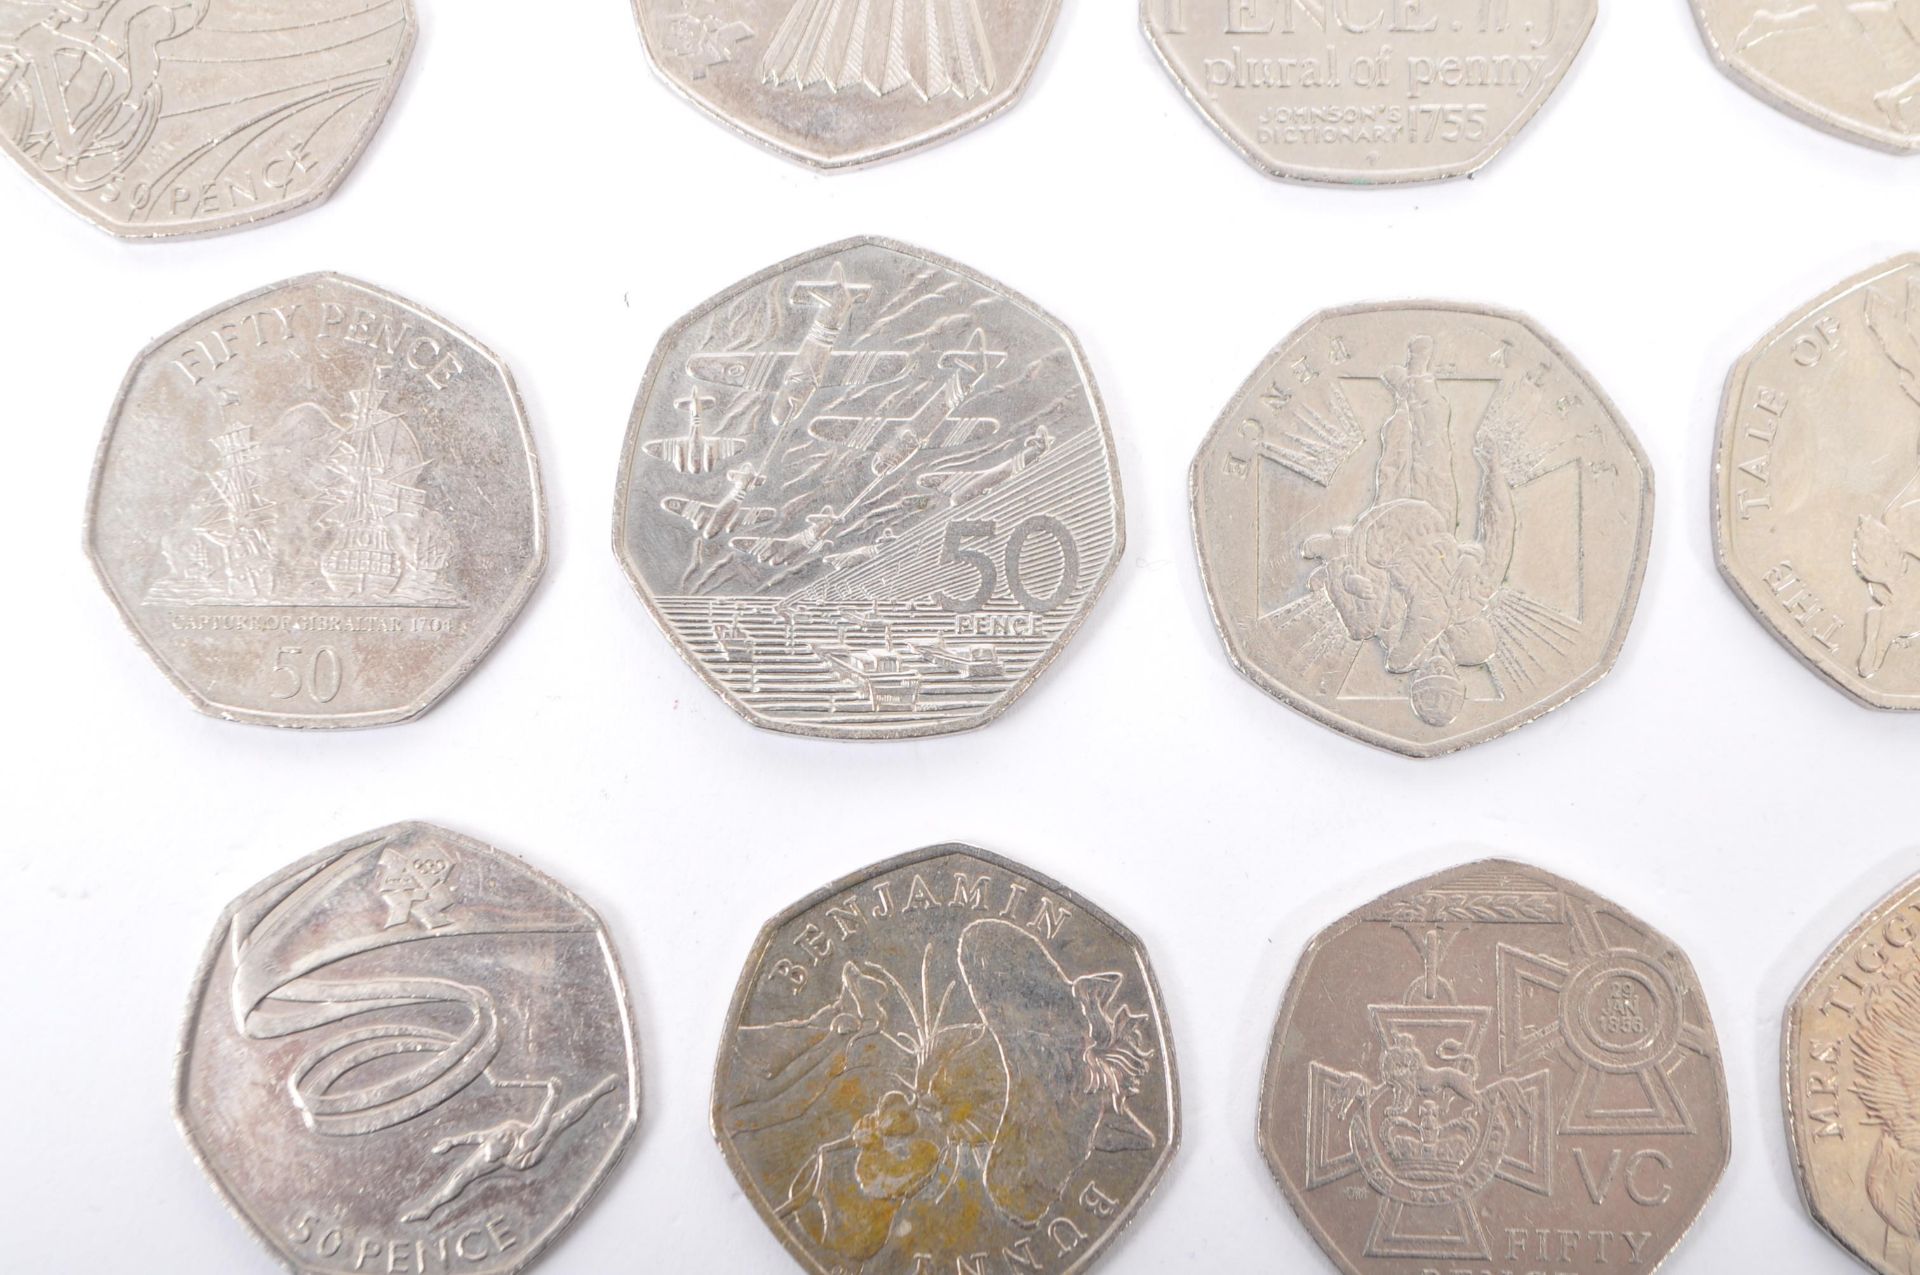 UK CIRCULATED FIFTY PENCE COINS INCL. 2011 FOOTBALL OFFSIDE - Image 2 of 7